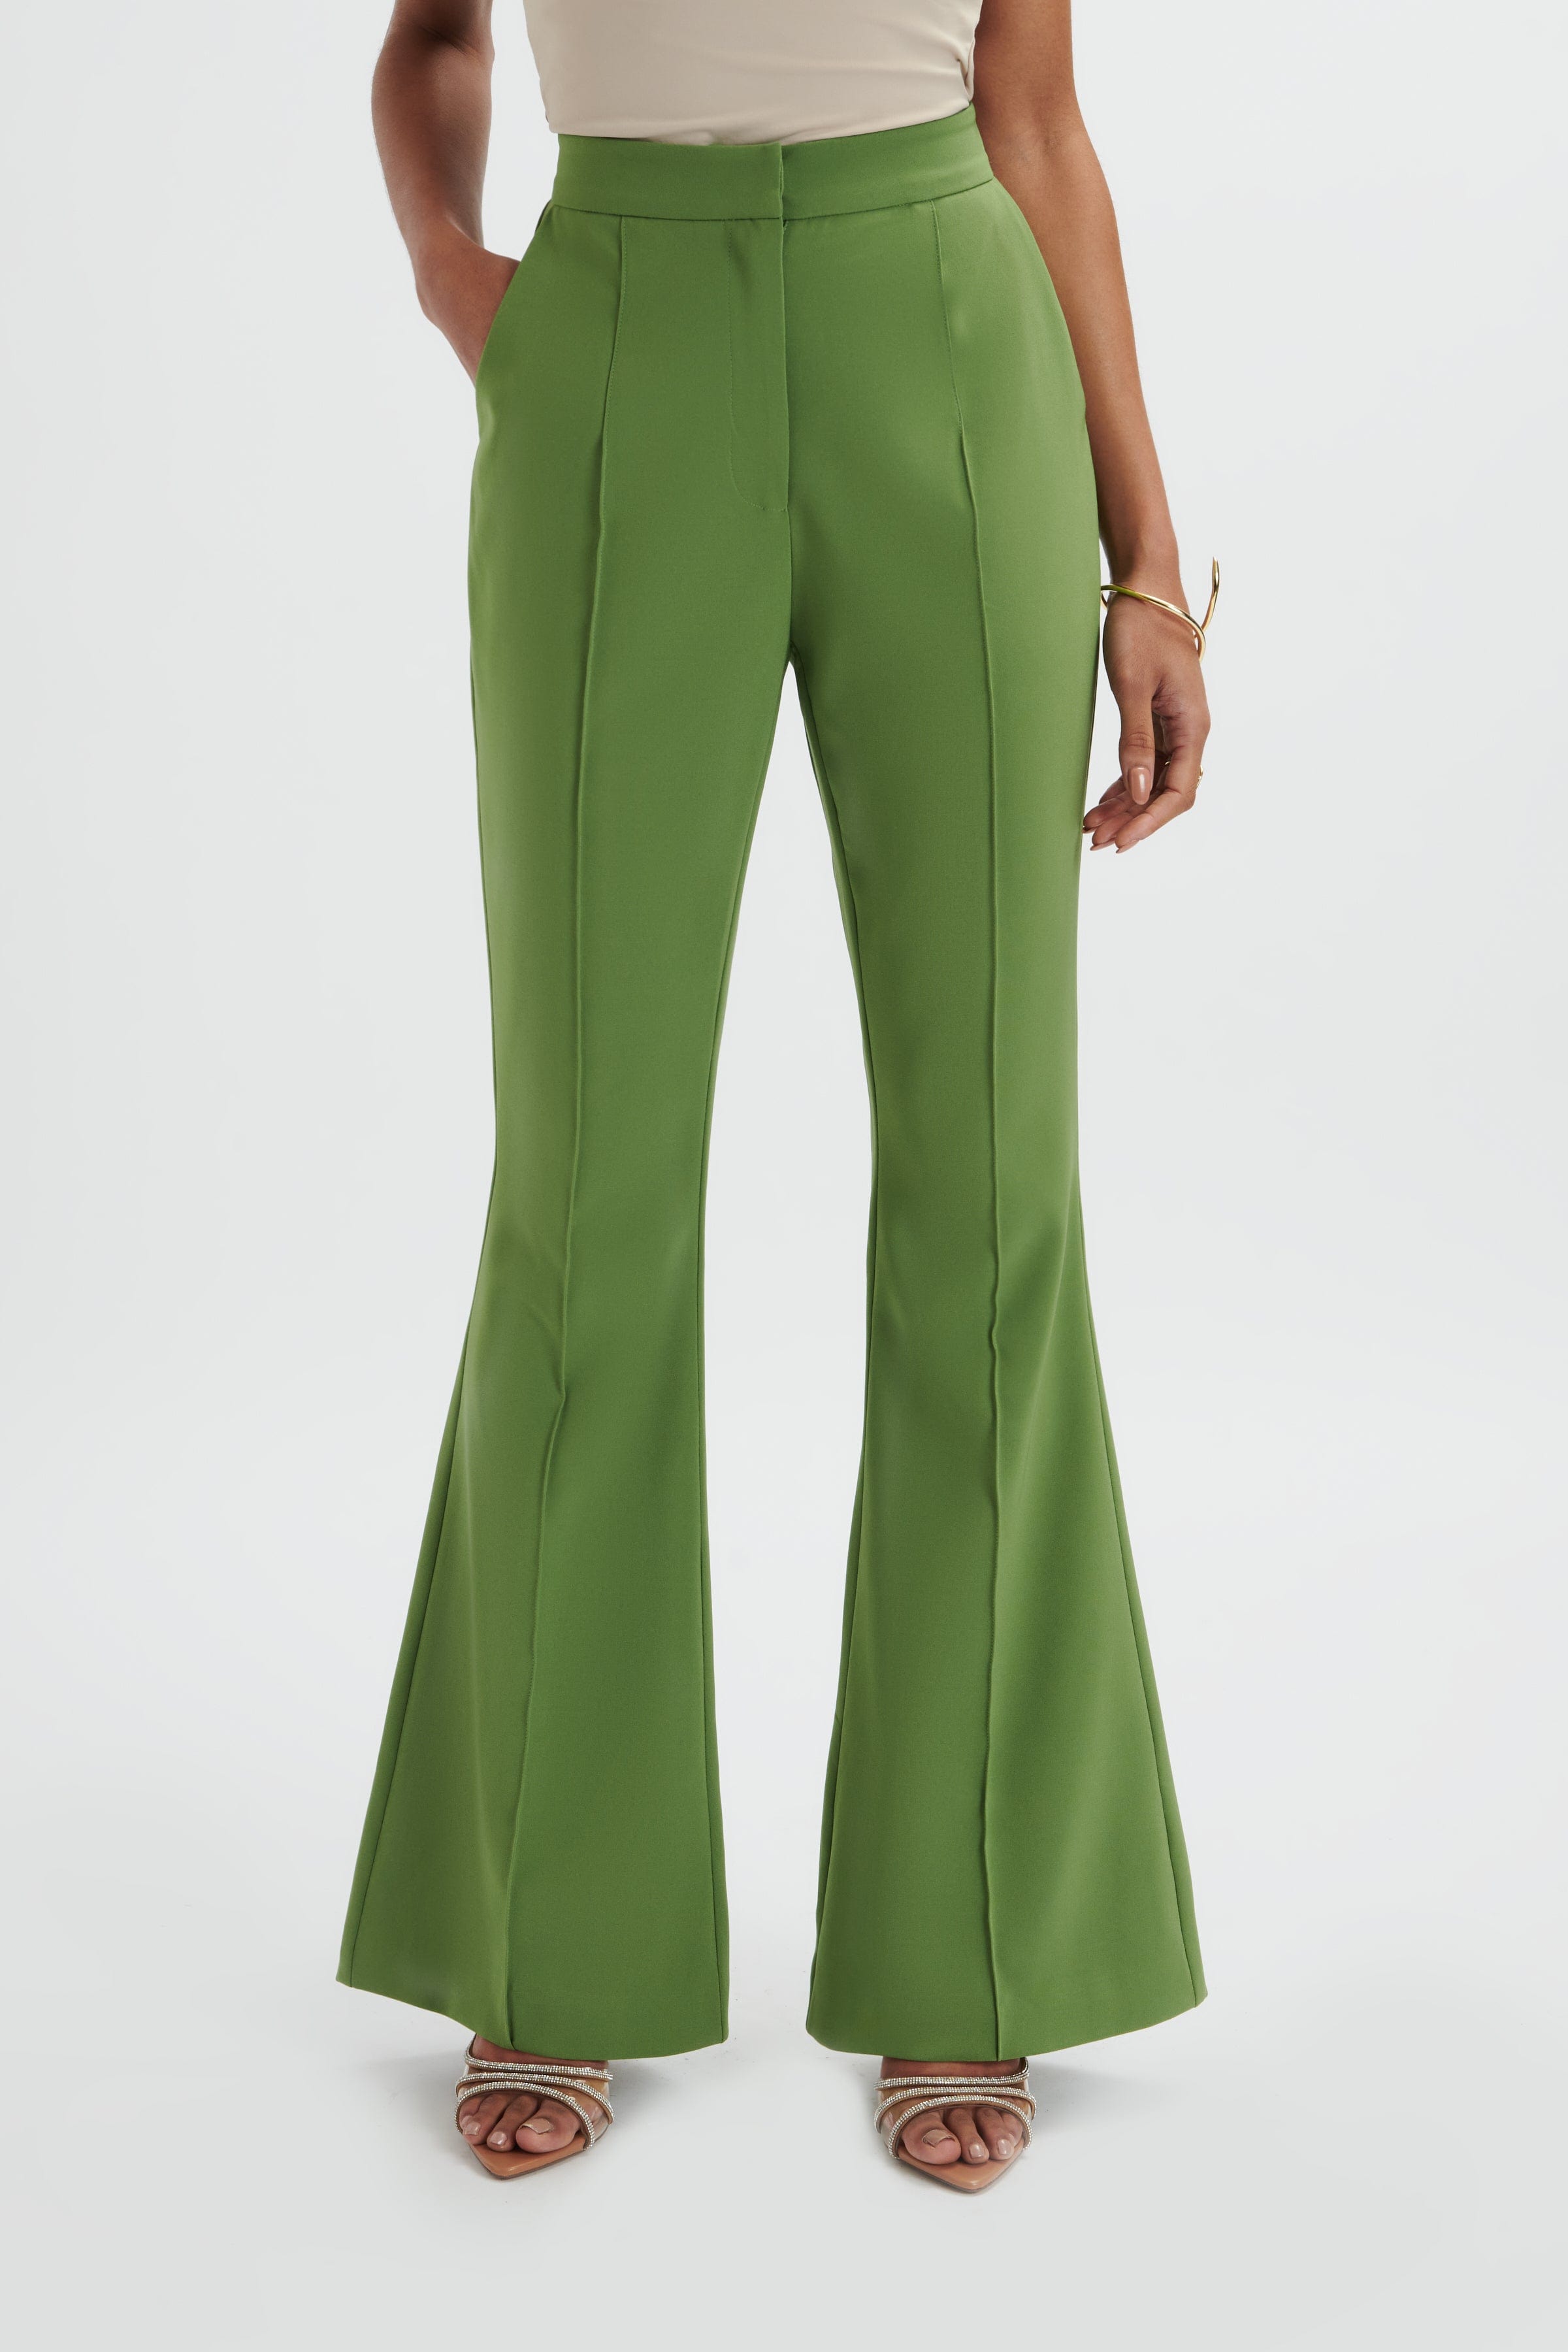 EMELIE Fit & Flare Tailored Trouser In Green